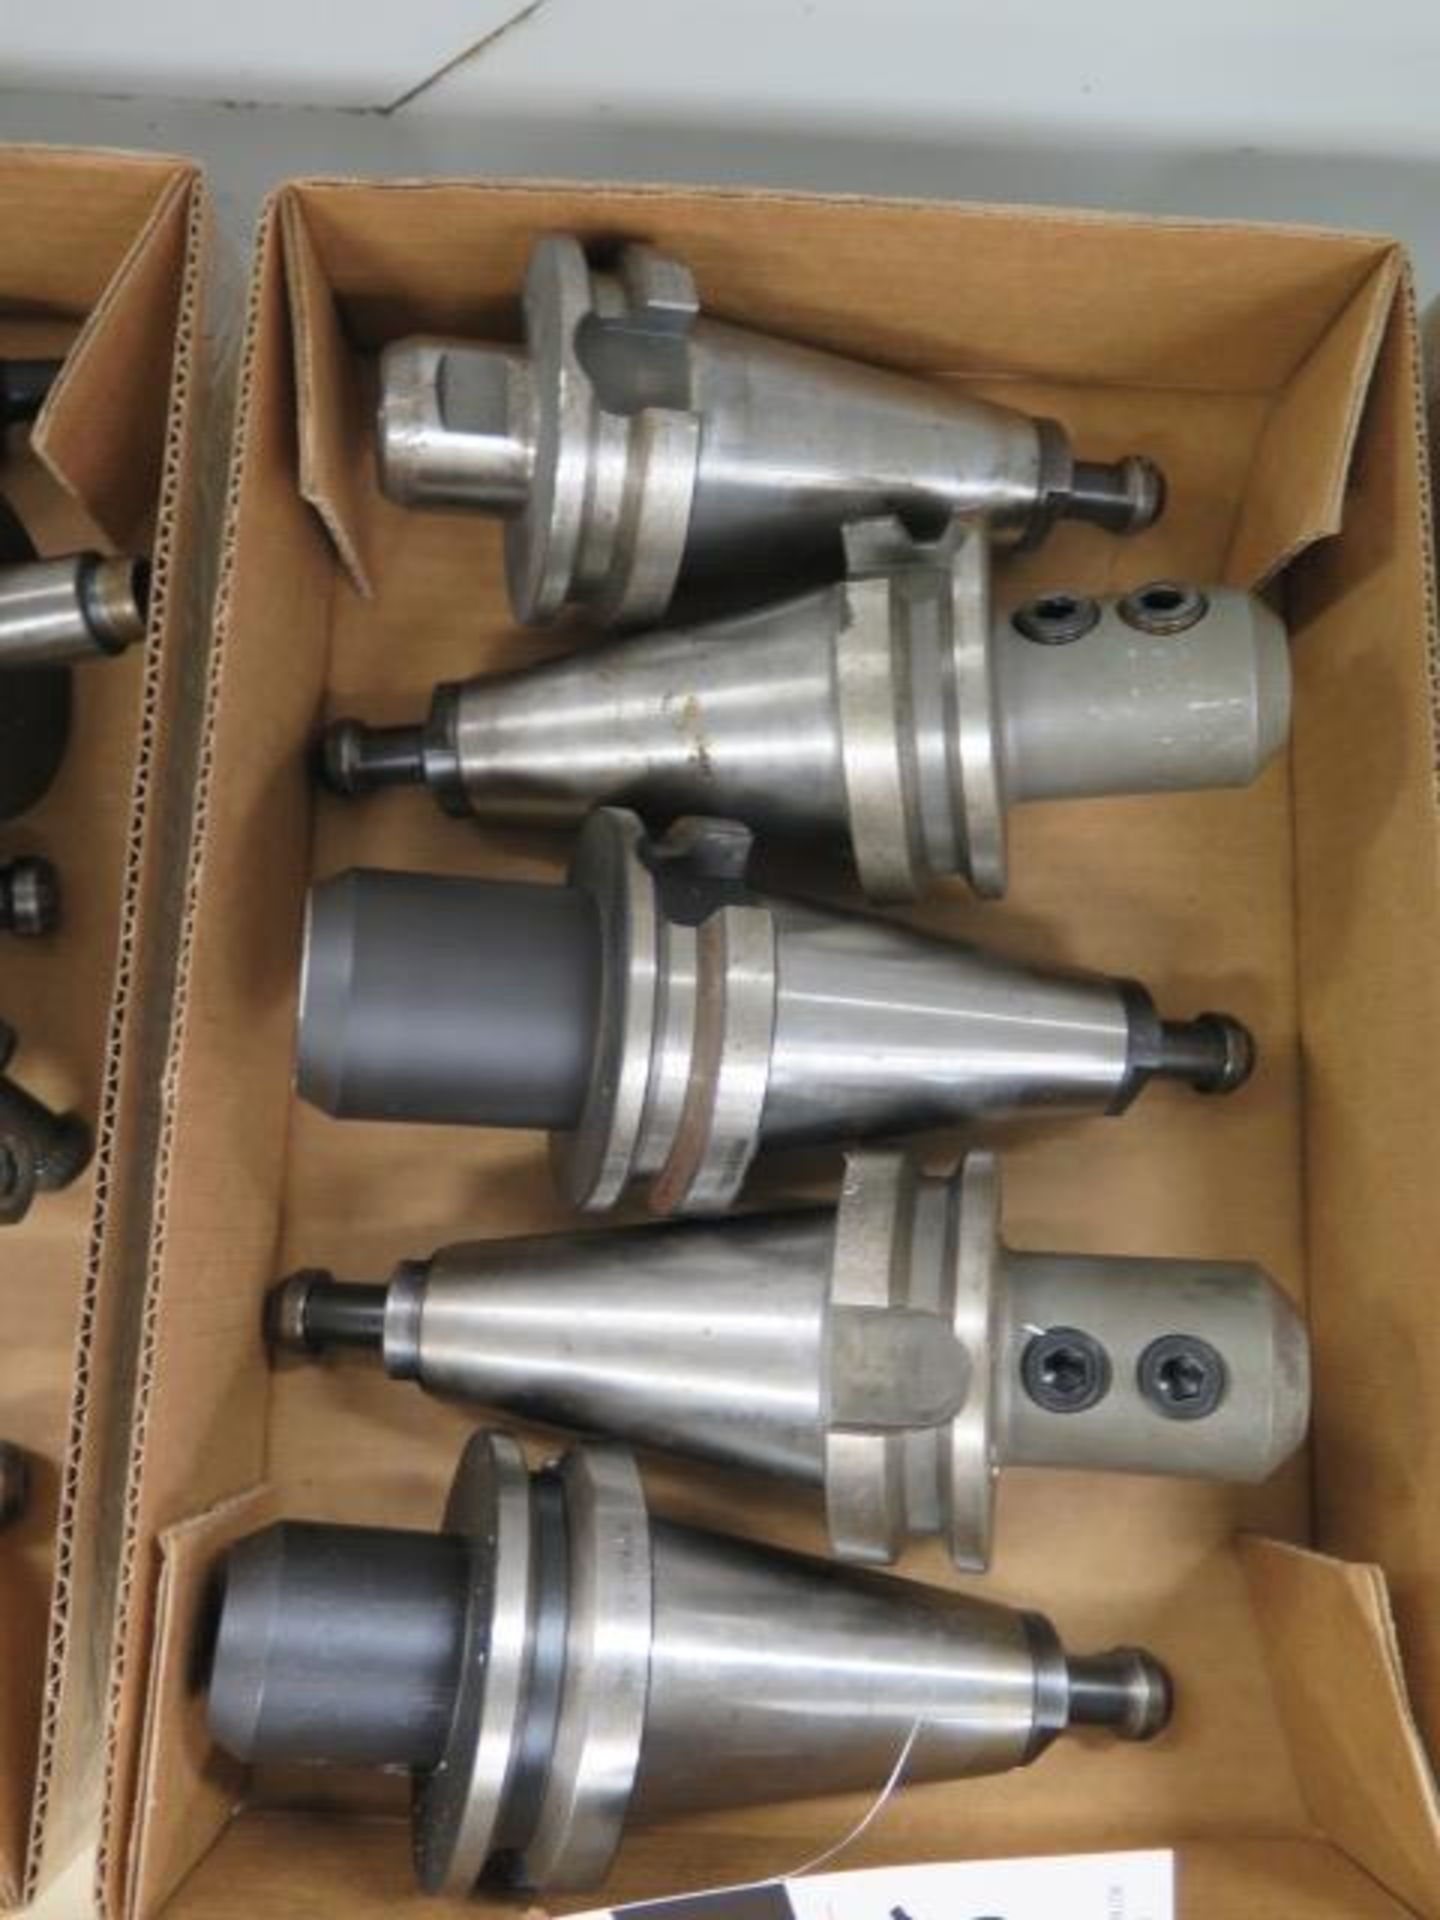 BT-50 Taper Tooling (5) (SOLD AS-IS - NO WARRANTY) (Located @ 2229 Ringwood Ave. San Jose) - Image 2 of 5